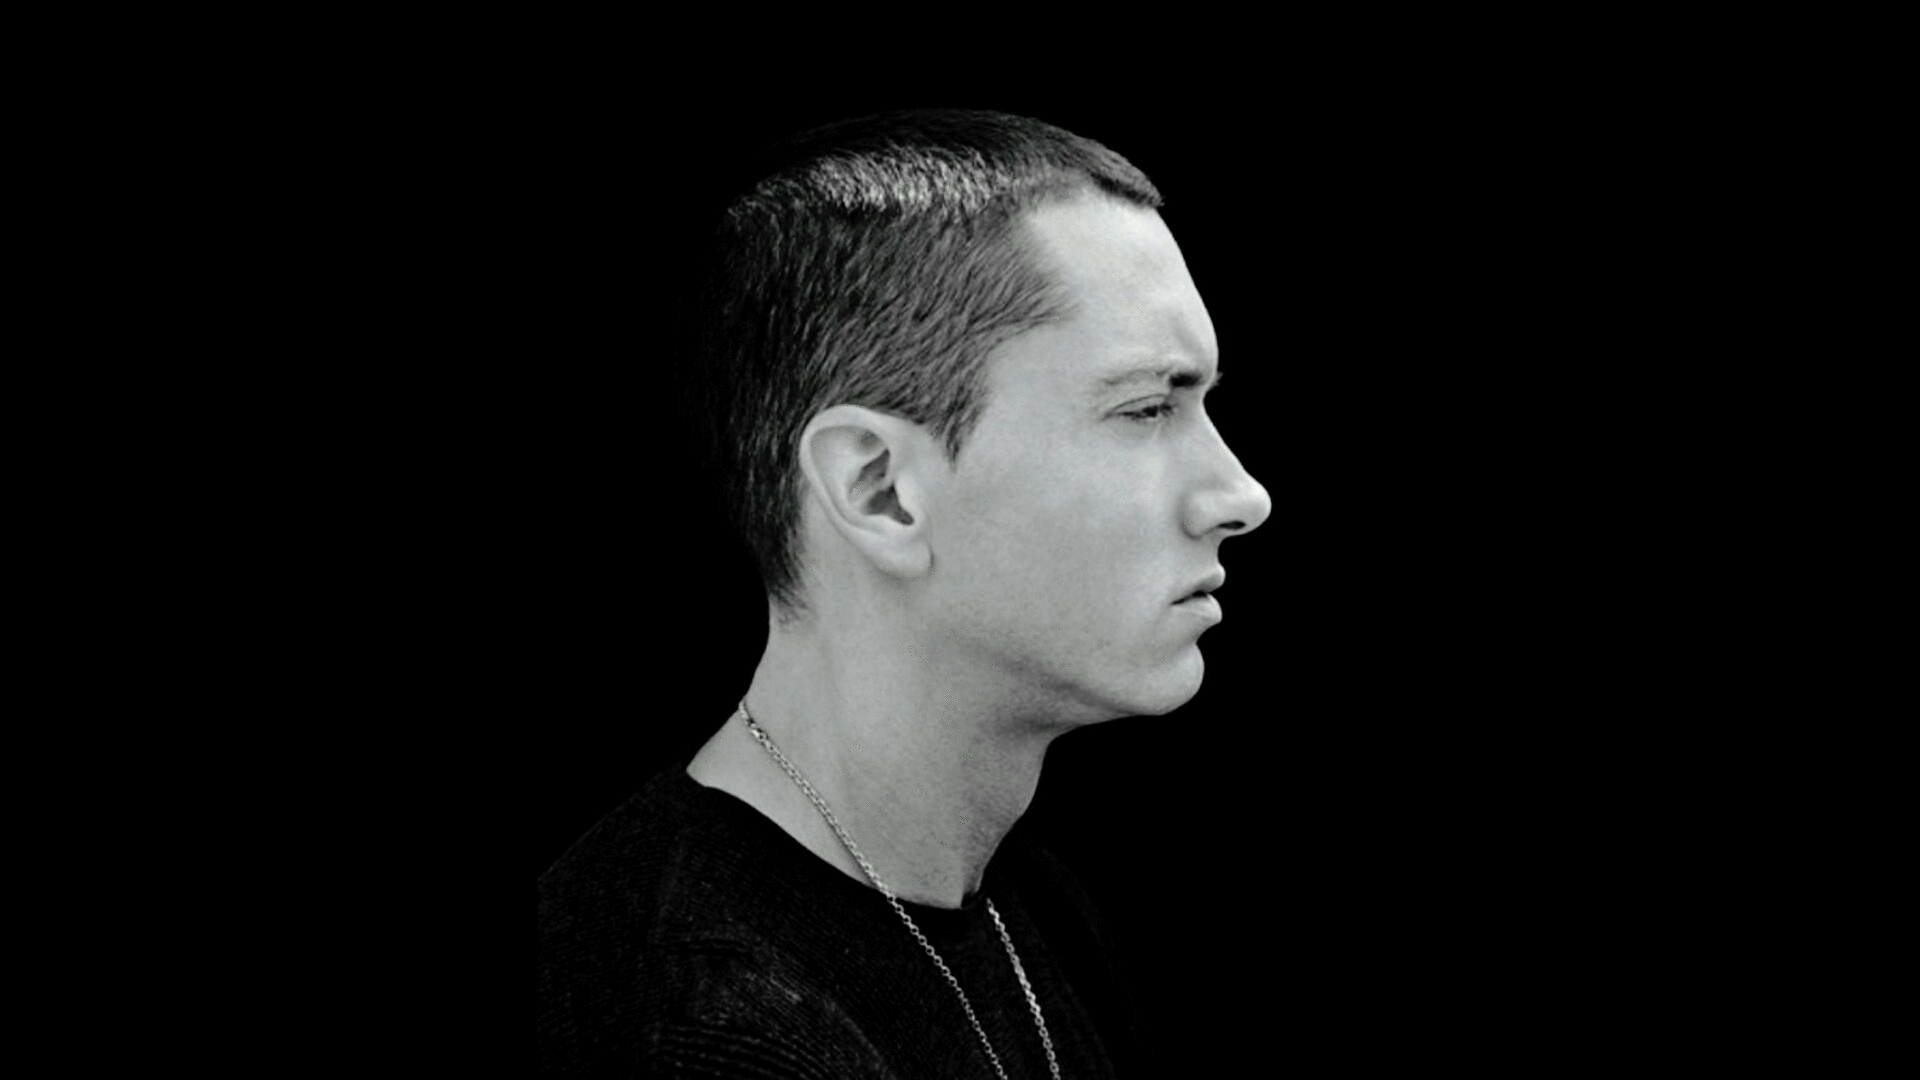 Eminem Full HD Wallpaper and Background Image | 1920x1080 | ID:480999